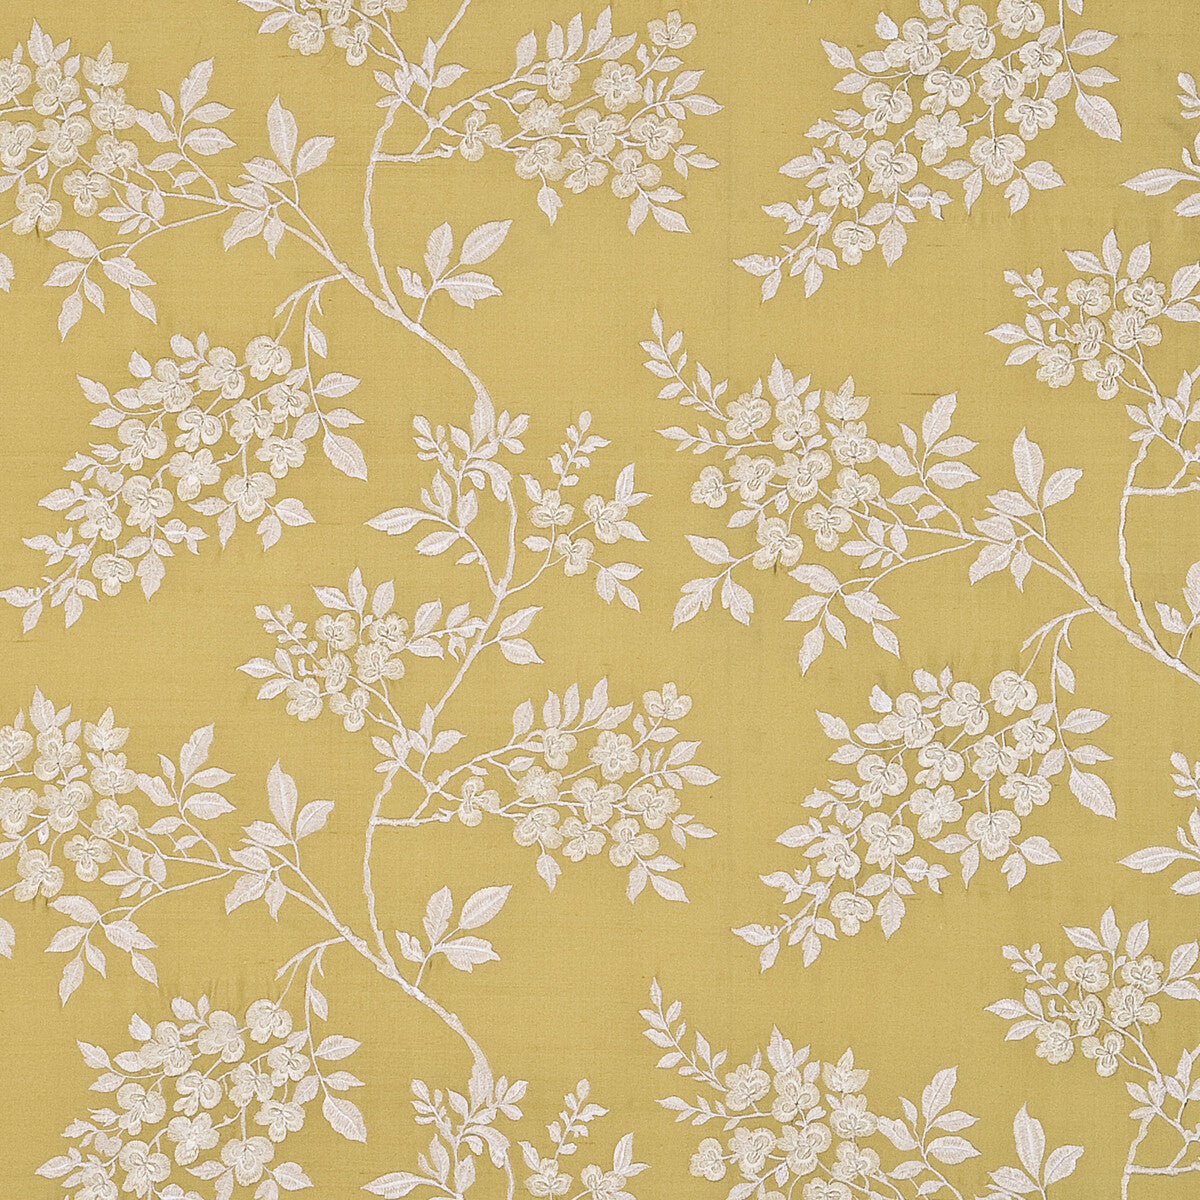 Wisteria Silk fabric in mimosa color - pattern BF10399.1.0 - by G P &amp; J Baker in the Holcott collection